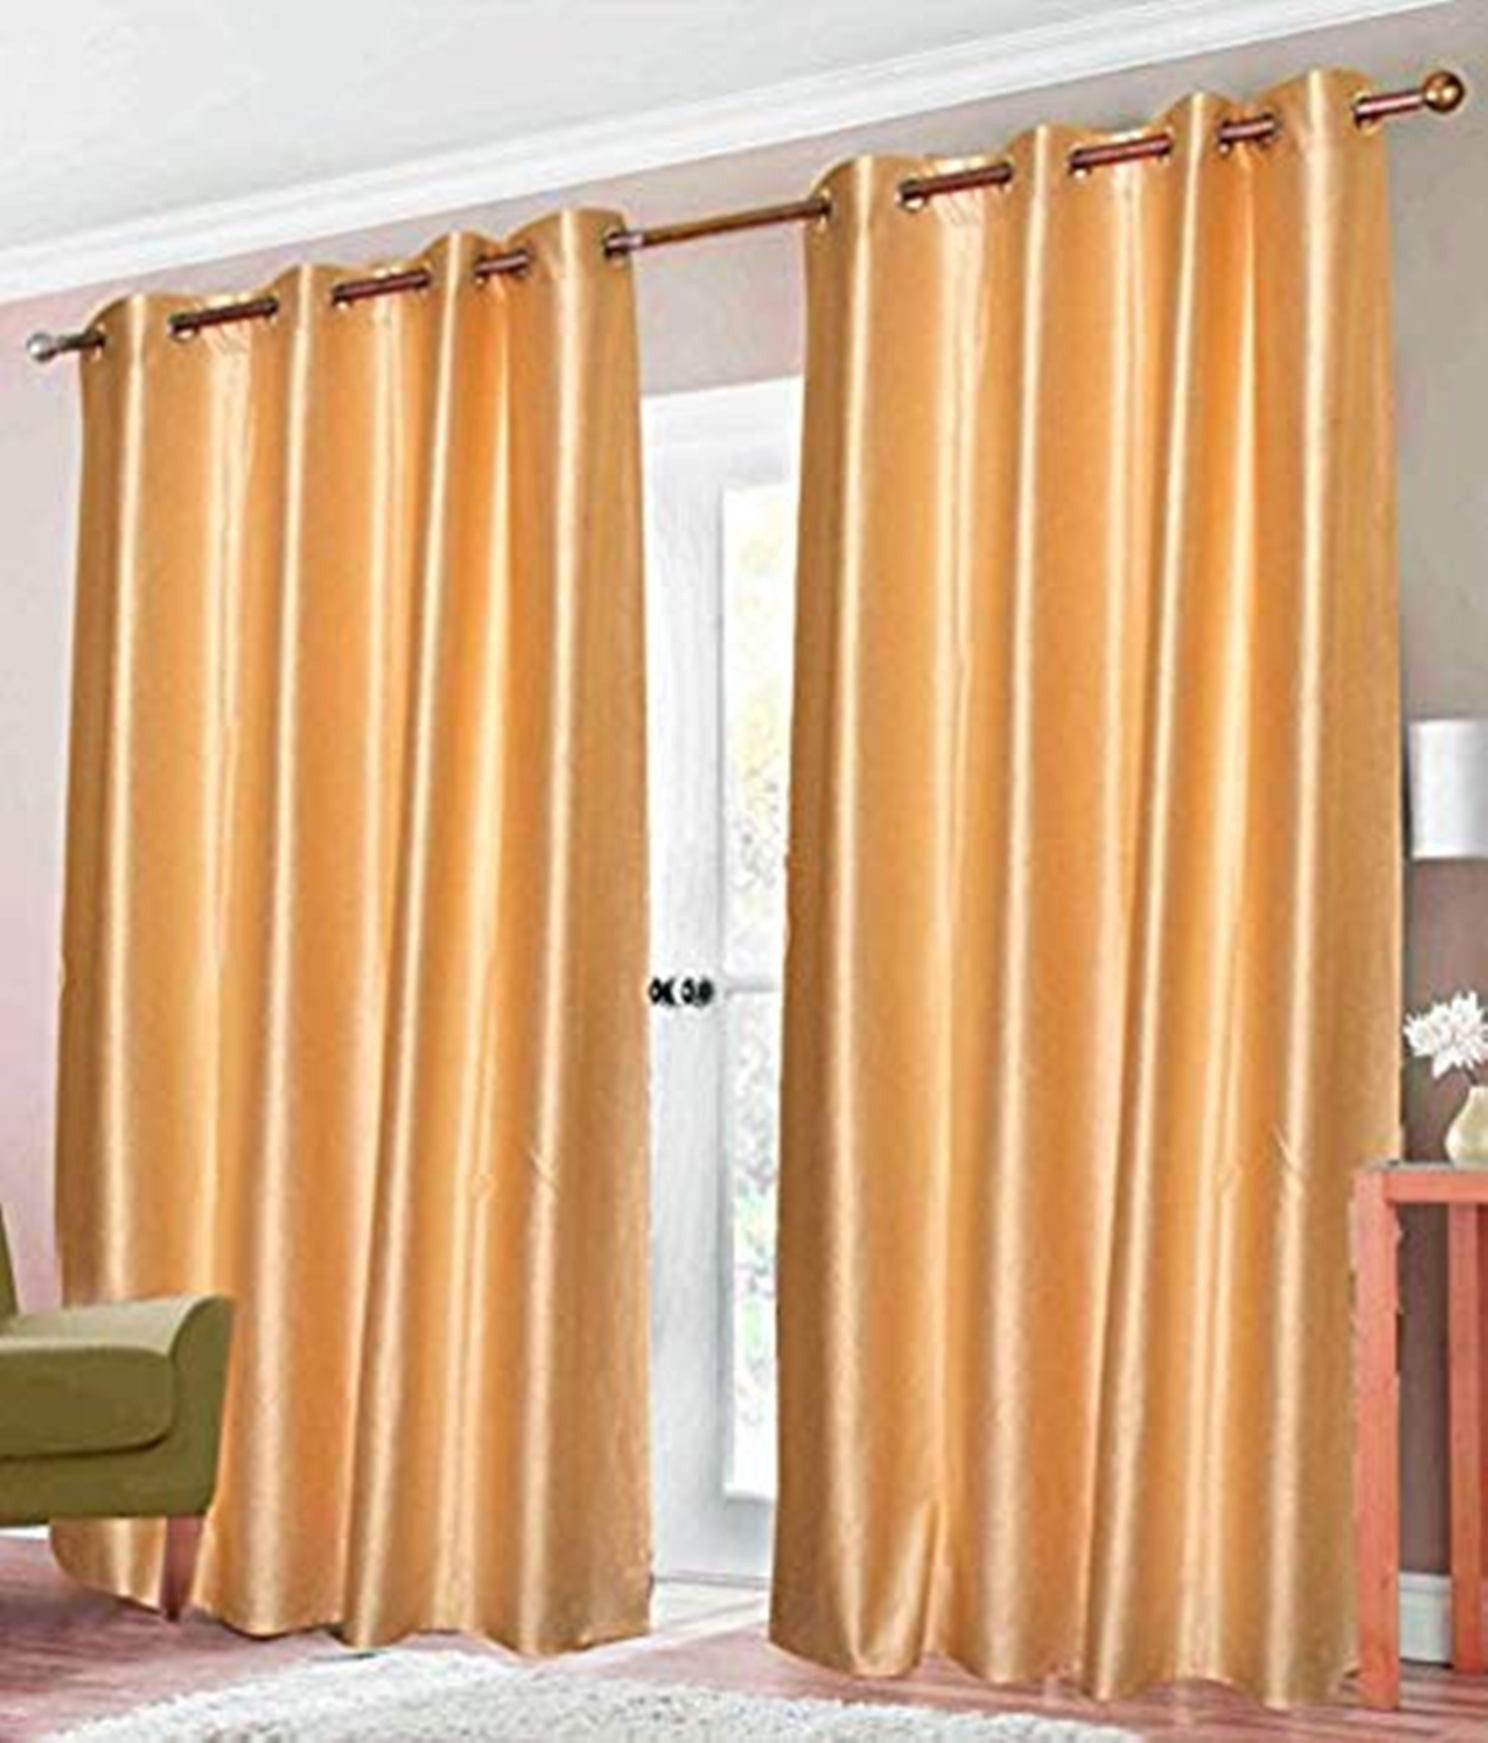     			N2C Home Solid Semi-Transparent Eyelet Curtain 9 ft ( Pack of 2 ) - Cream